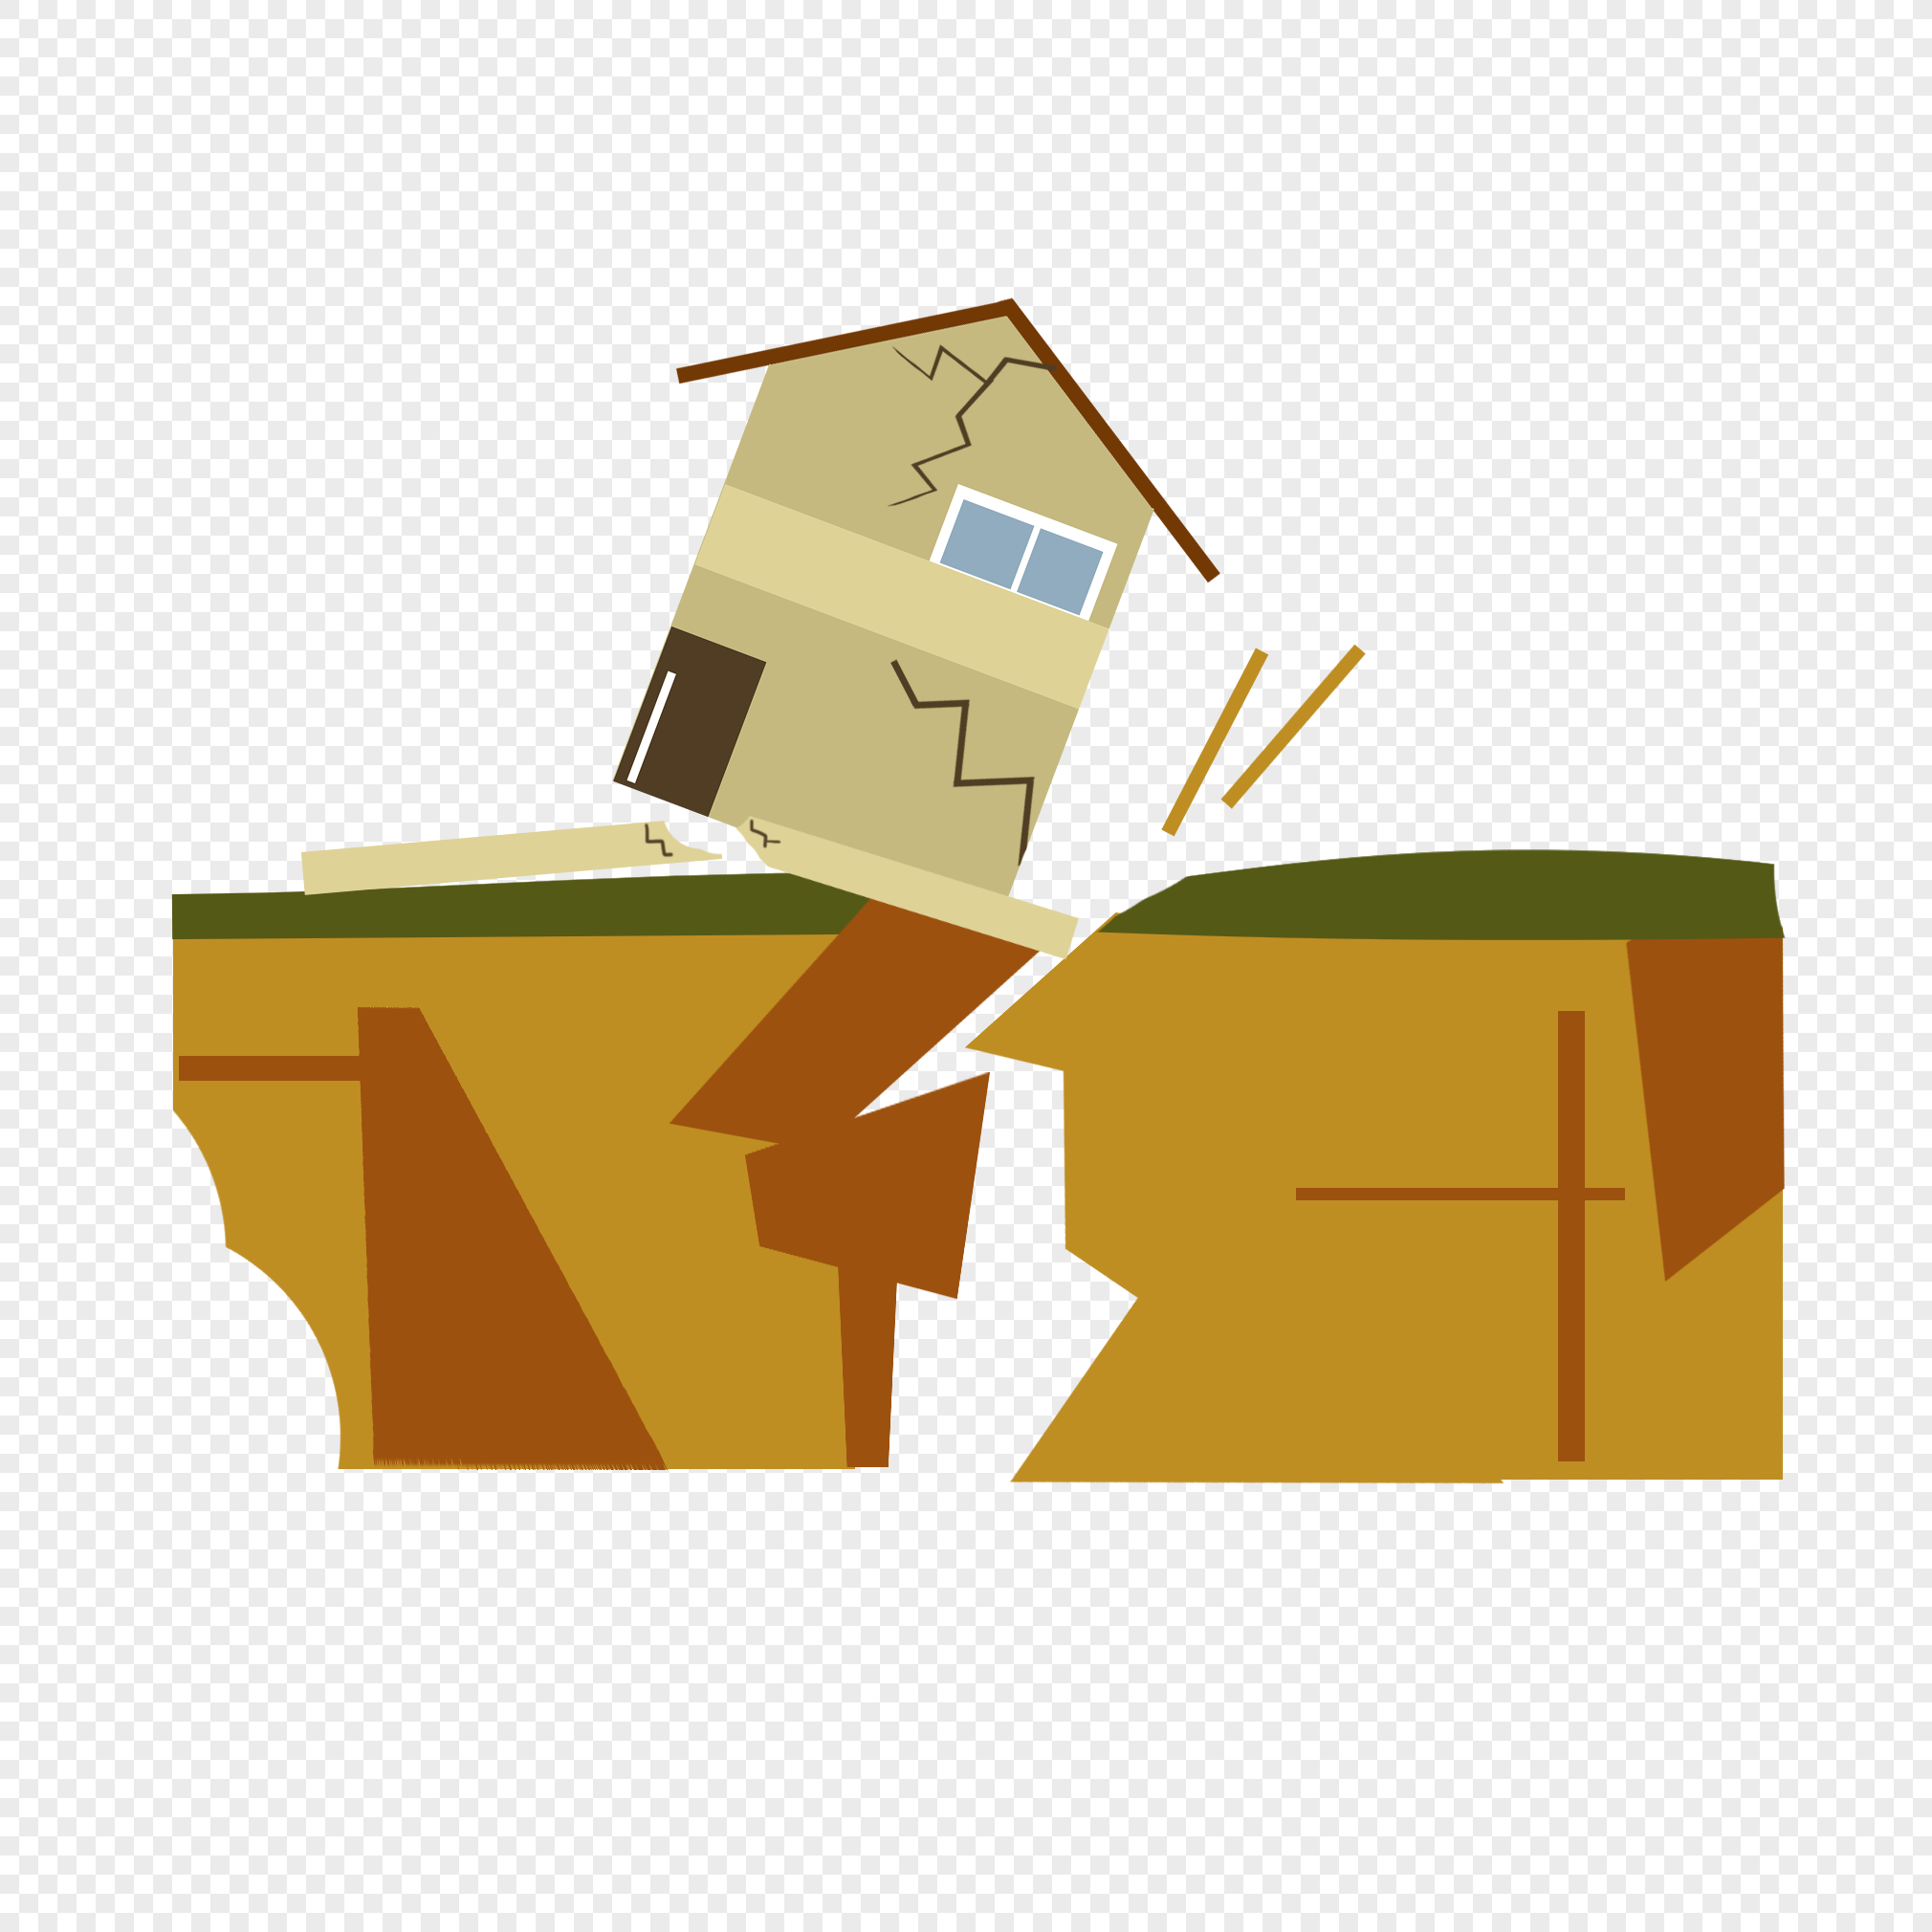 Earthquake Scene Images, HD Pictures For Free Vectors Download 